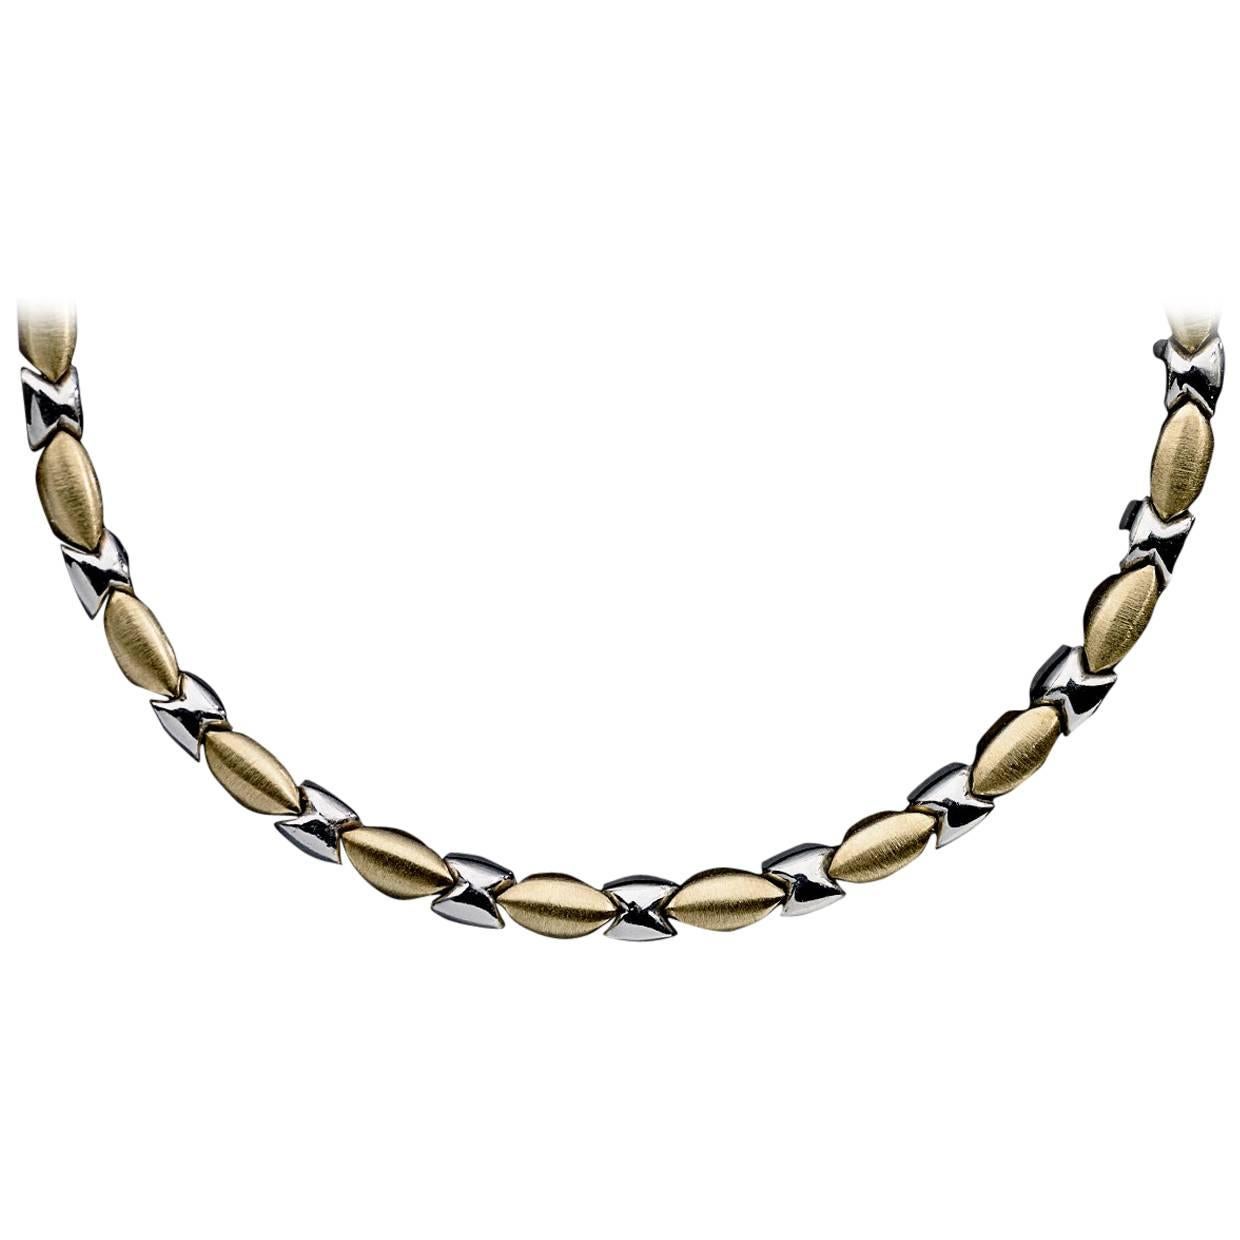 Yellow and White Gold Alternating Beads Chain Necklace